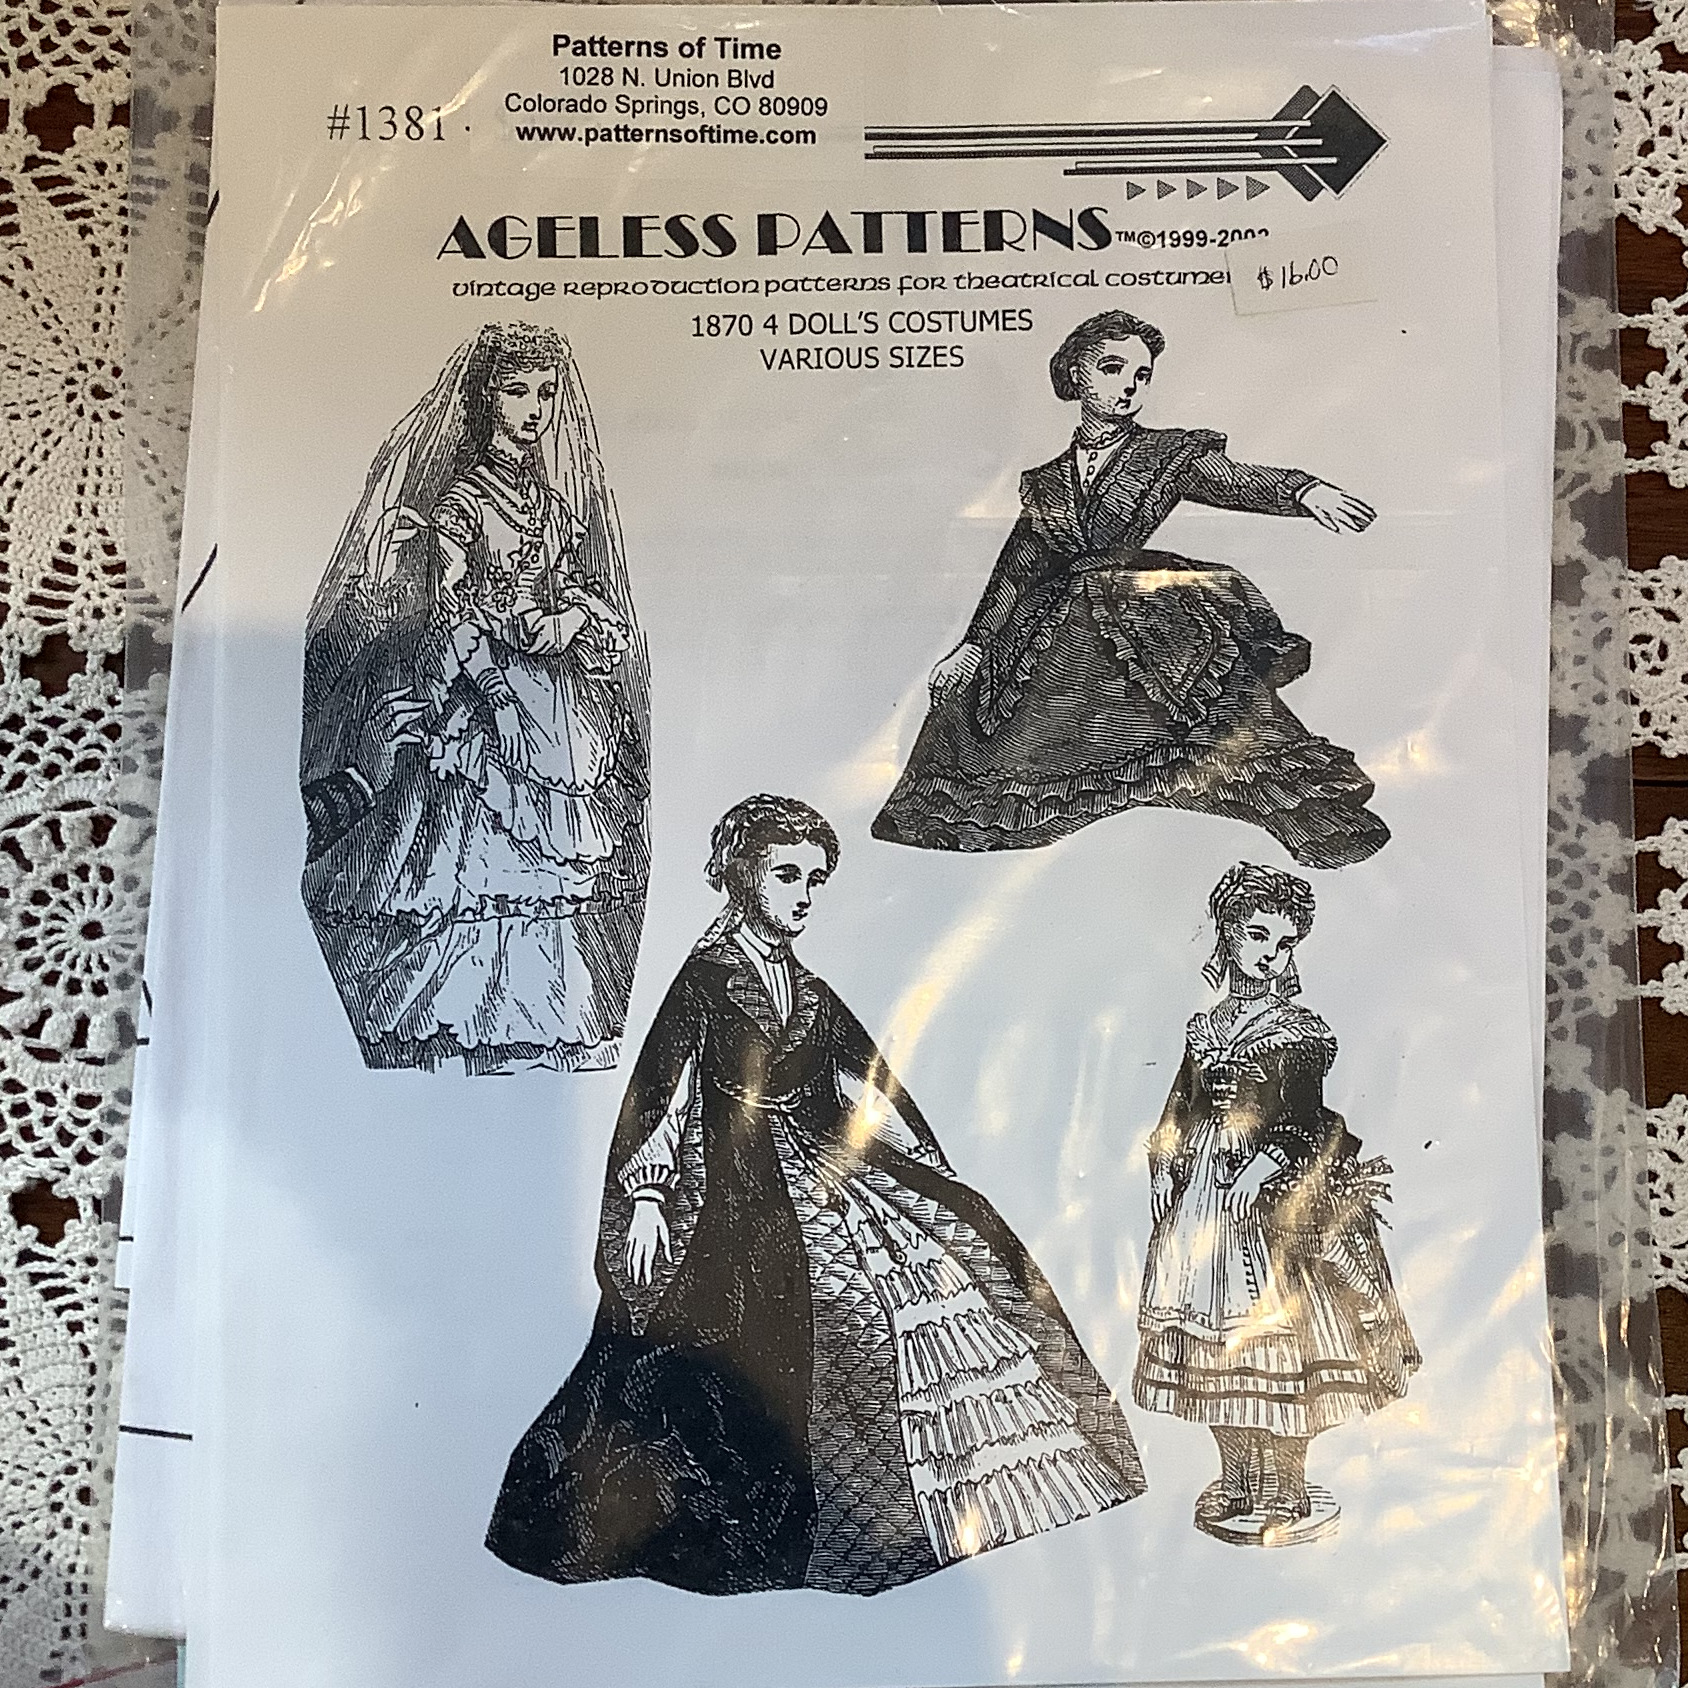 Sewing patterns to make four 1870-style doll dresses for a variety of sizes